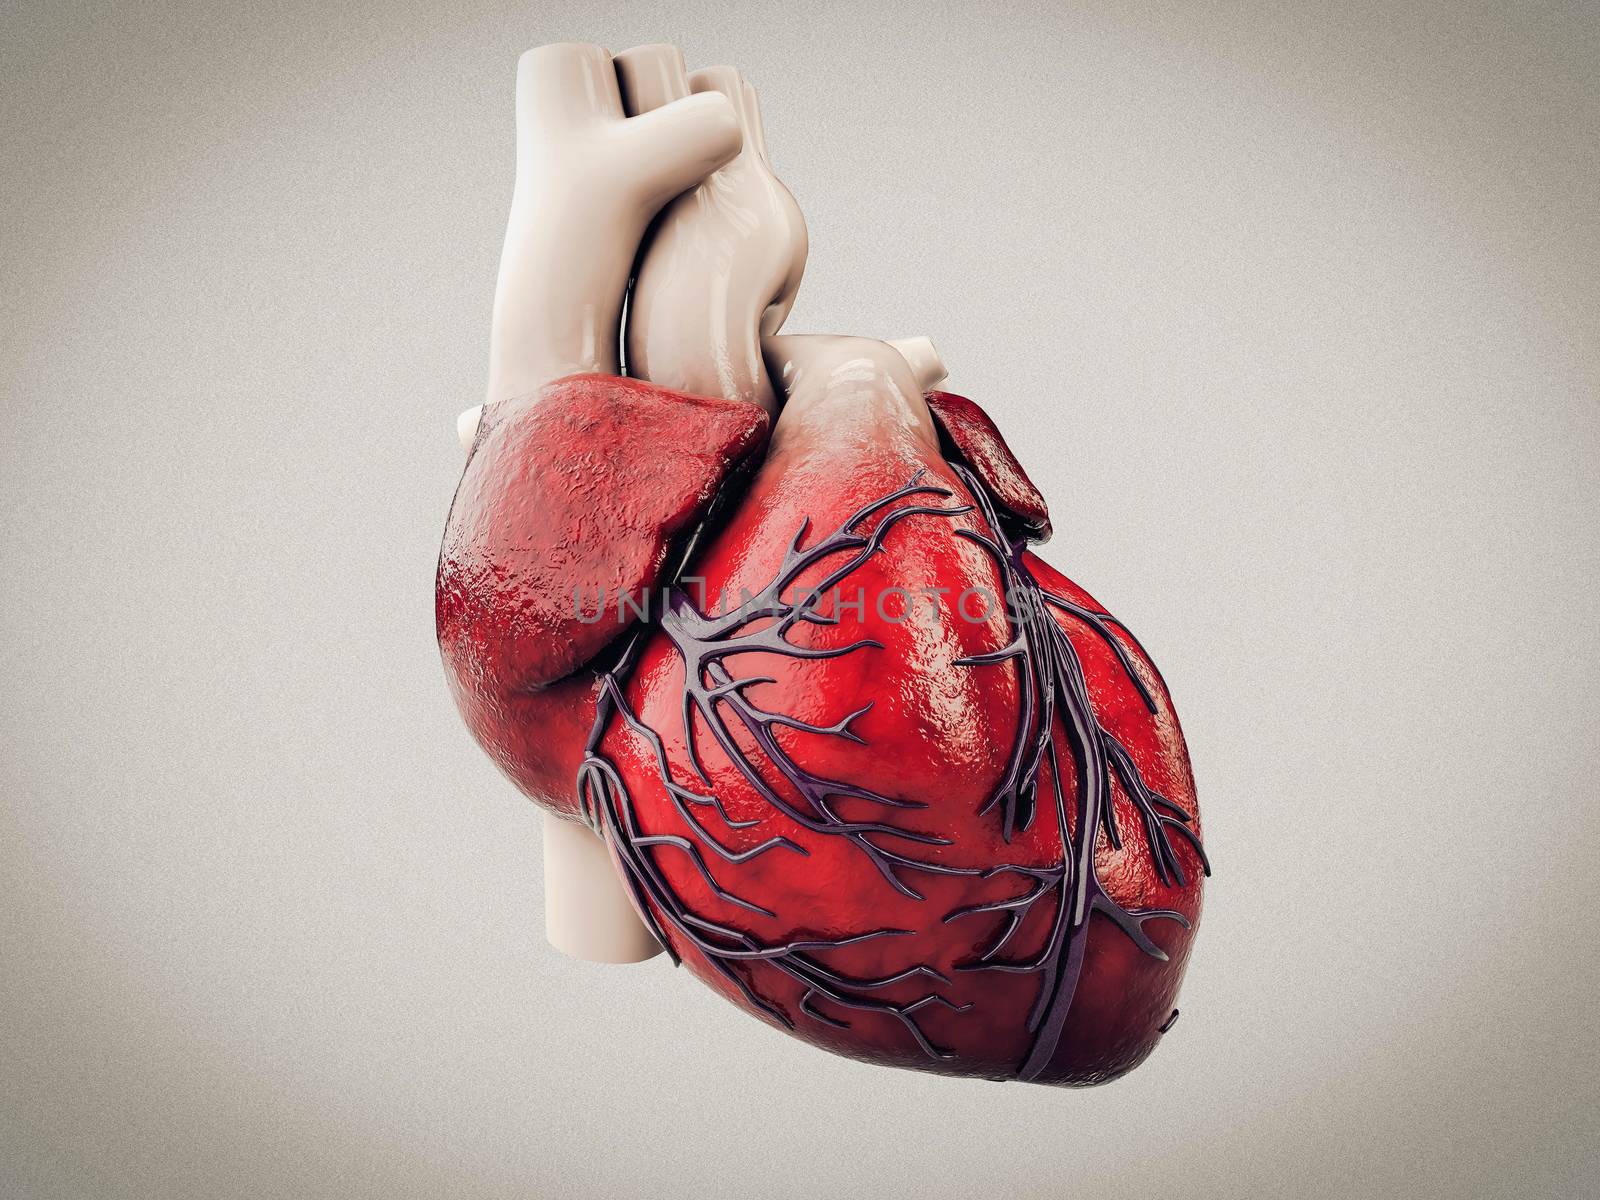 3d Illustration of Anatomy of Human Heart Isolated on gray by tussik